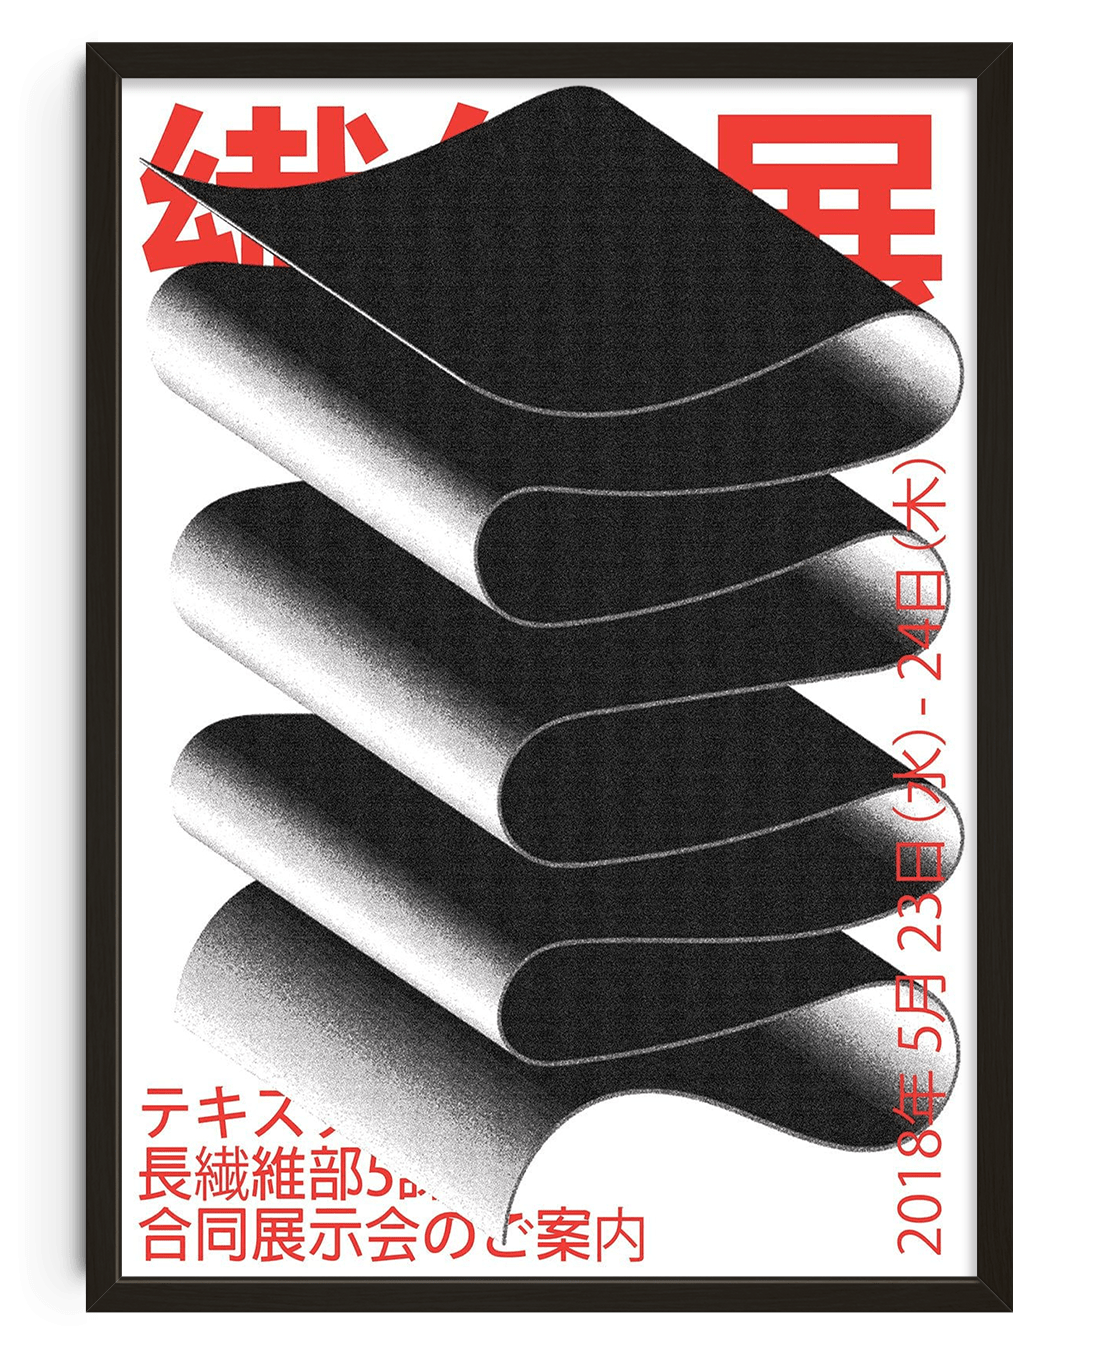 8.3x11.7" (A4) / Framed black Japan World contemporary wall art print by Maxim Dosca - sold by DROOL